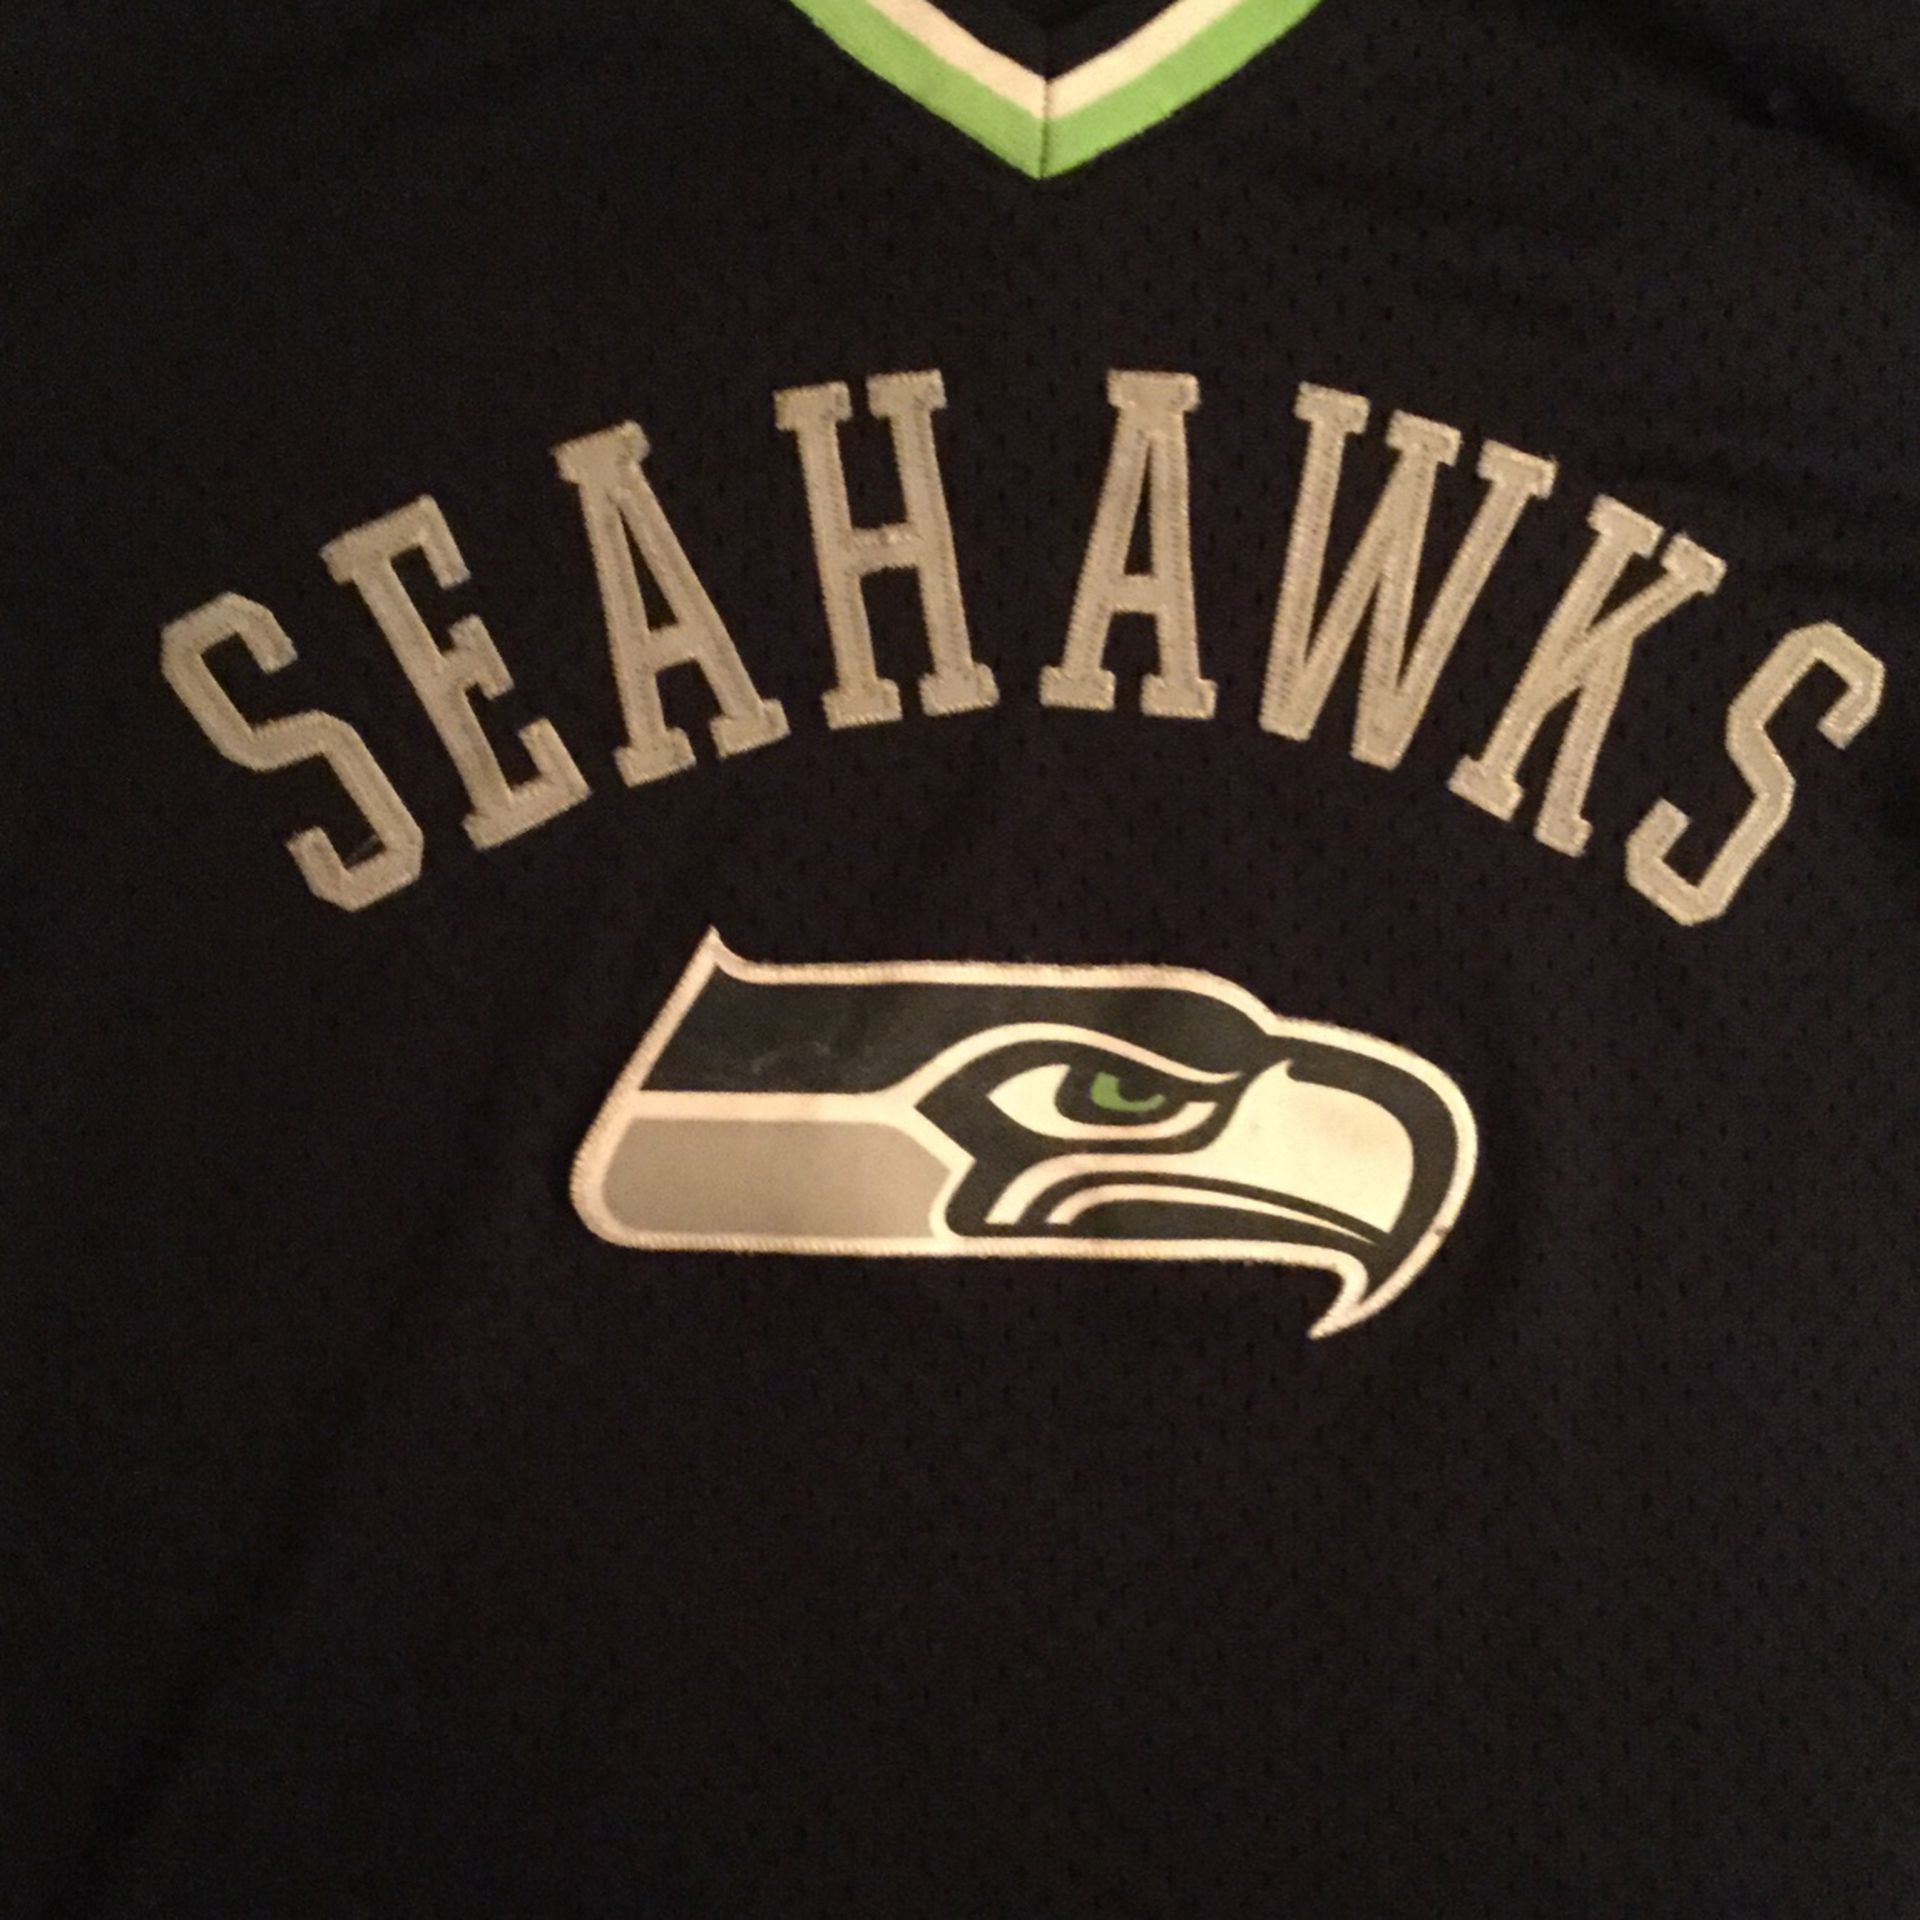 Youth Med. Seahawks NFL official jersey -  like new